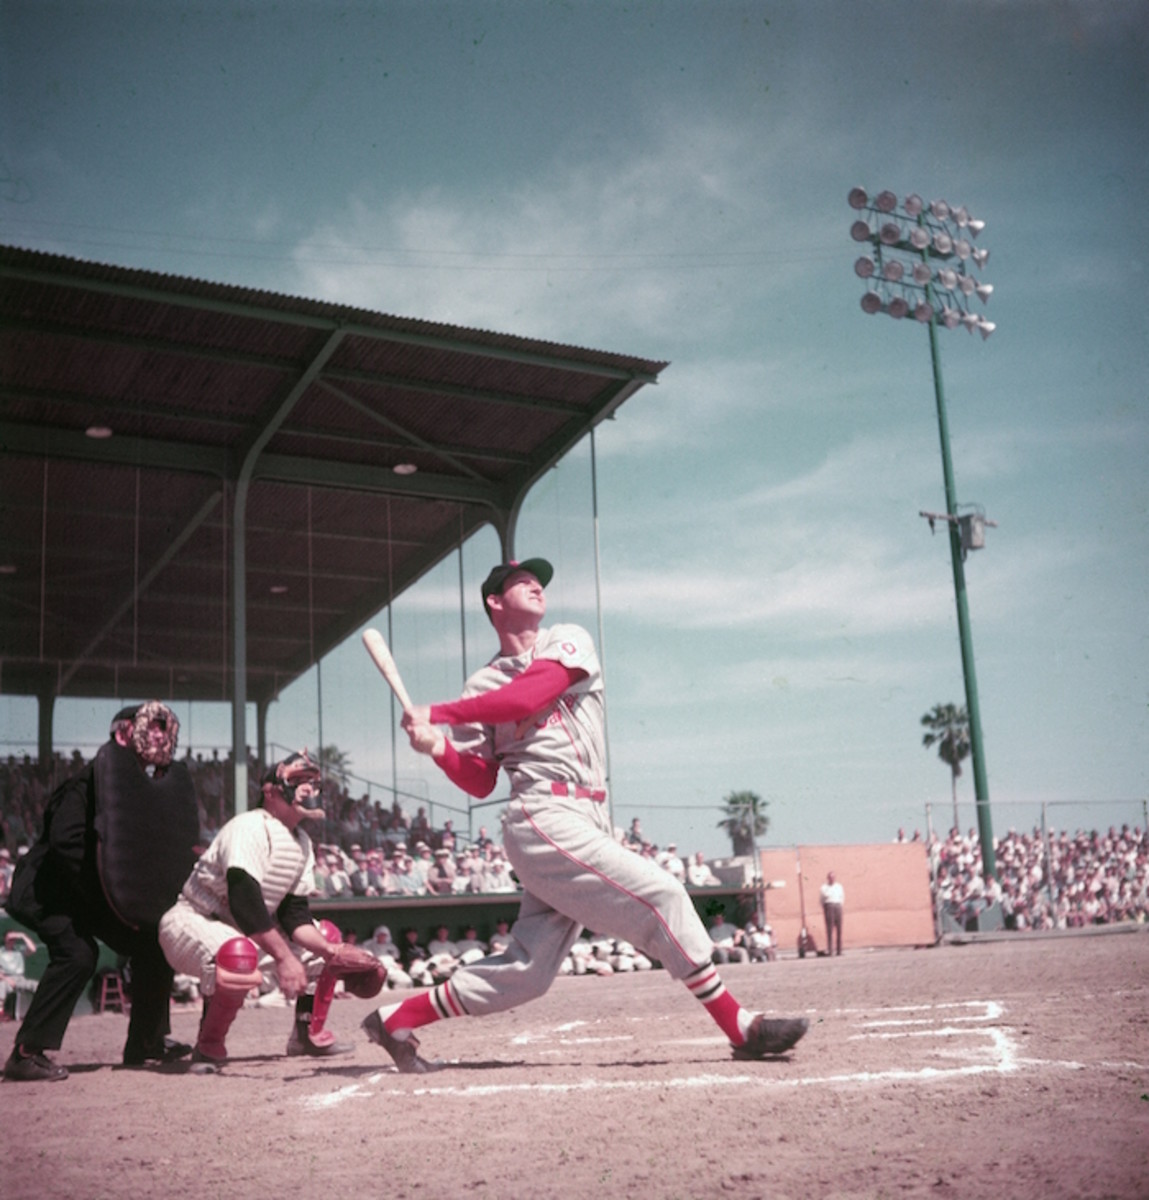 Cardinals, Six things to know on Stan Musial's birthday